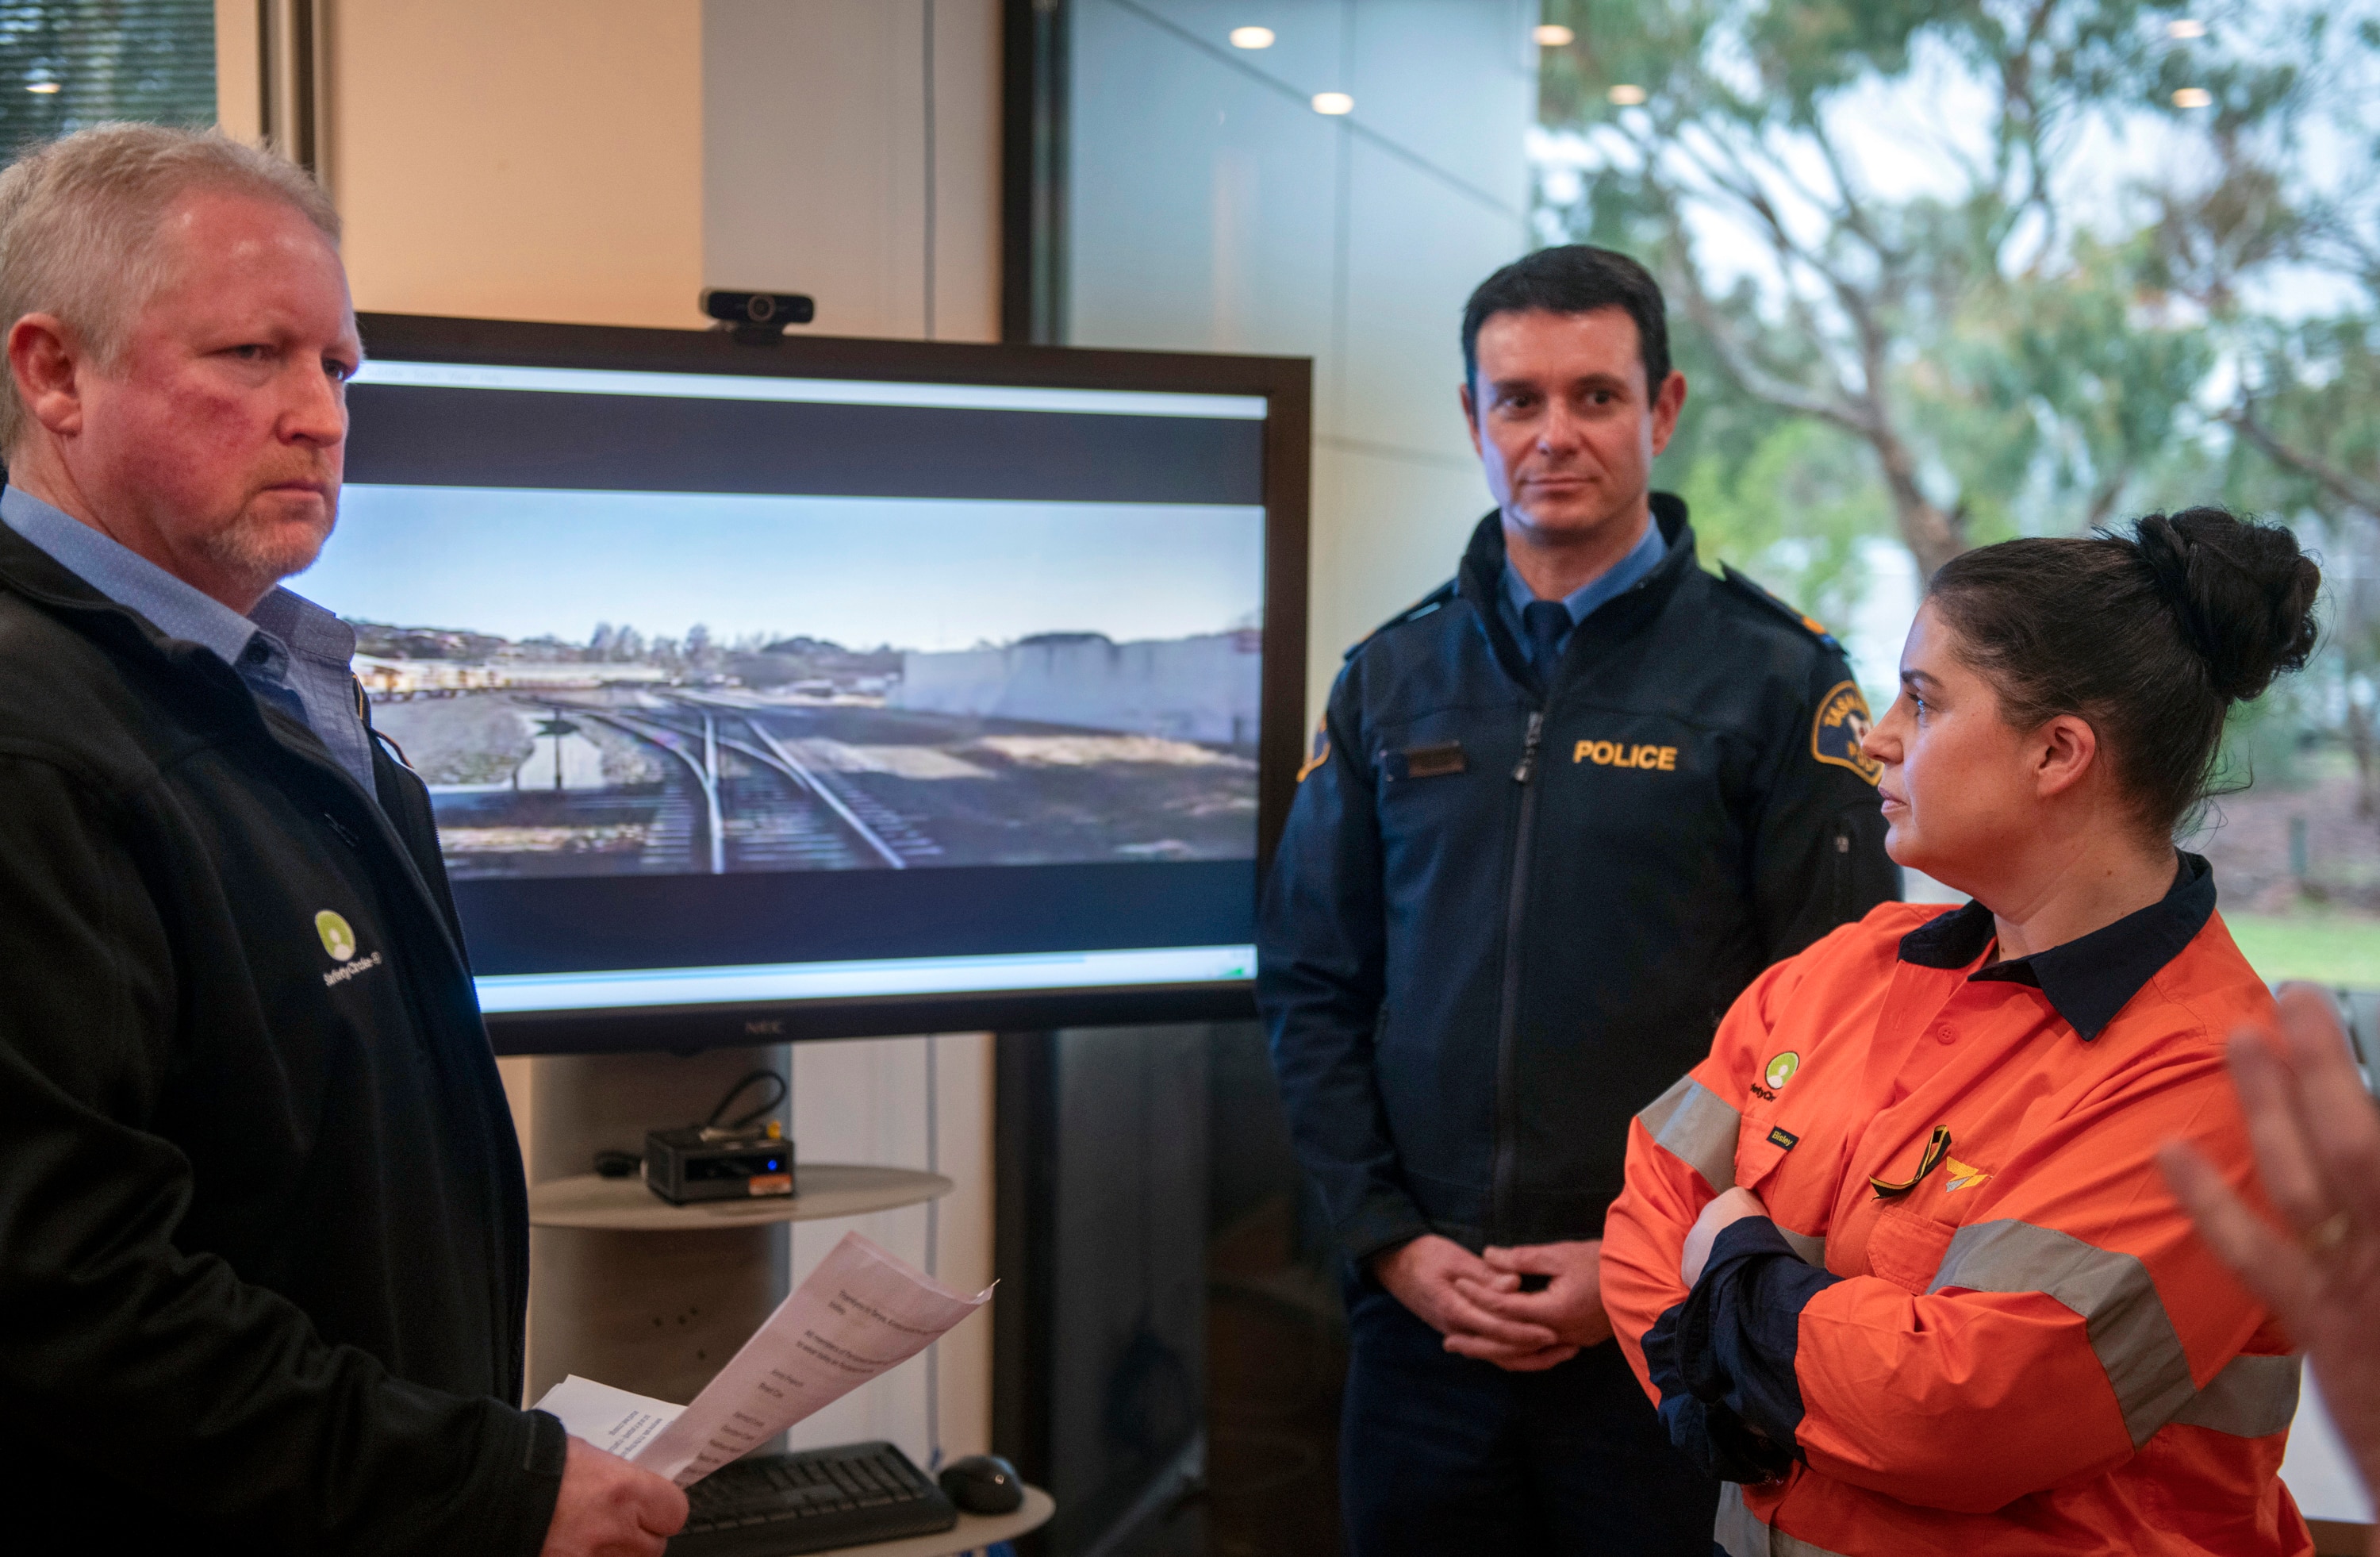 Two men and one woman in a fluro orange vest gather around a video screen depicting railroad tracks.